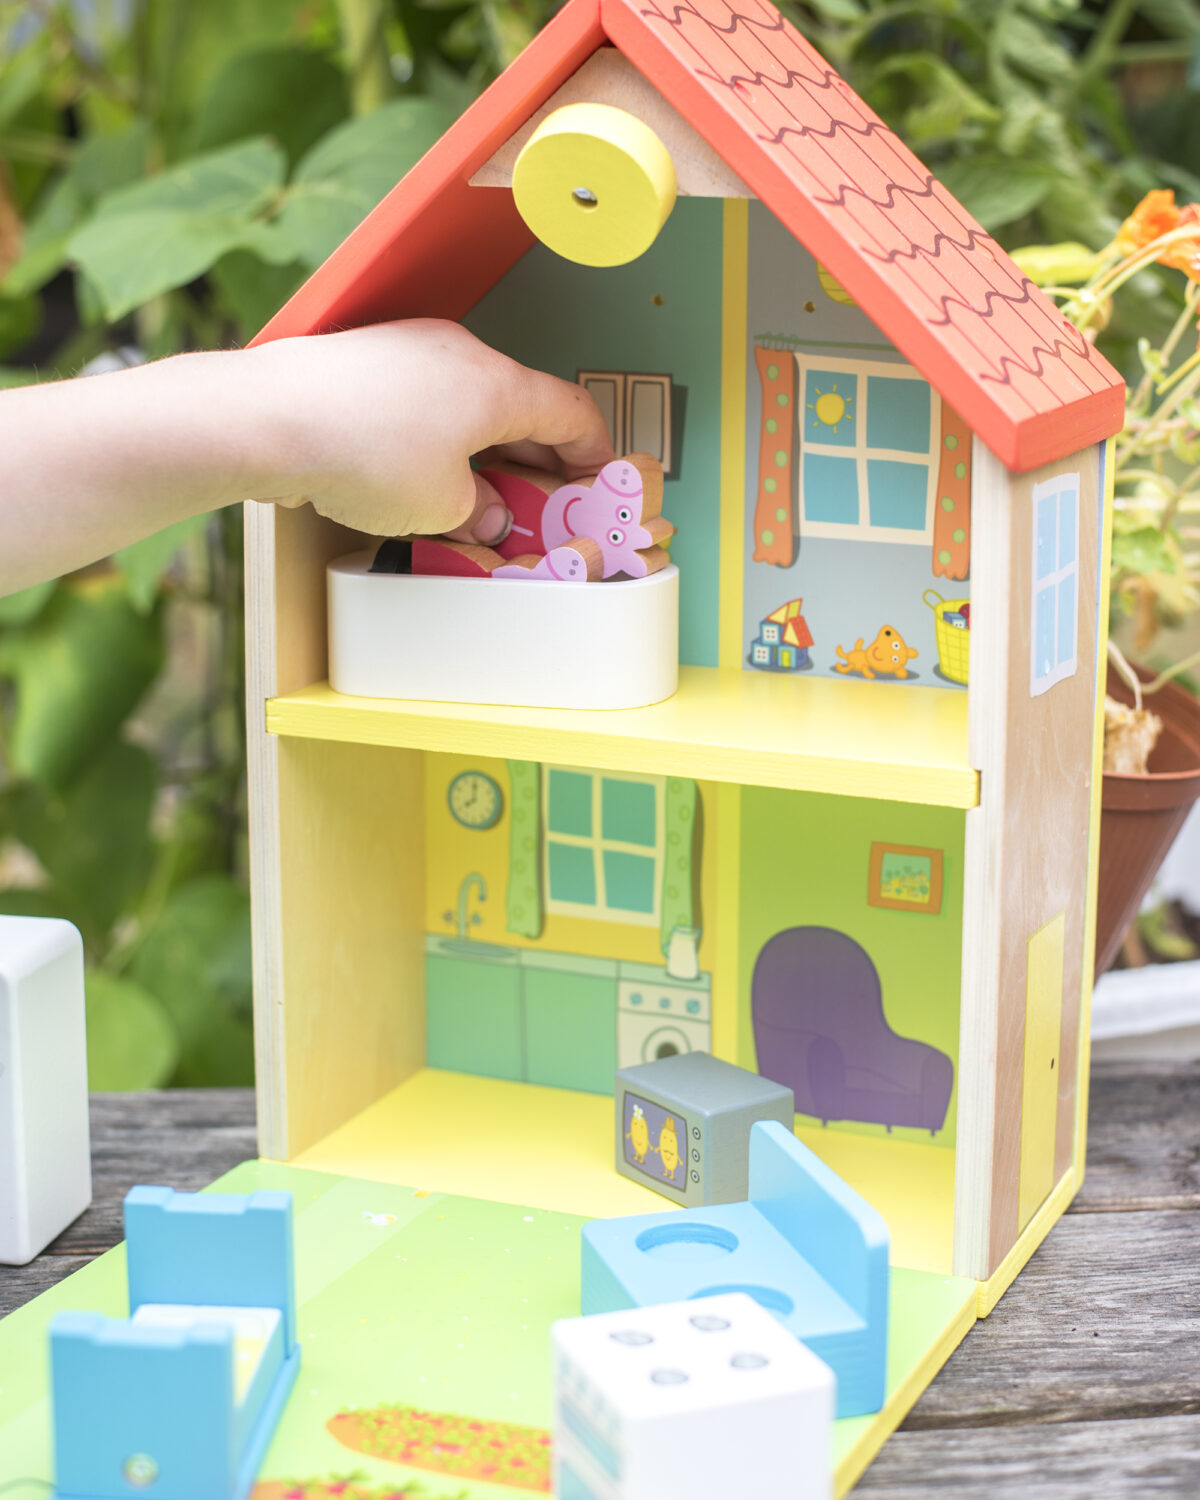 Inside of Peppa Pig Wooden House